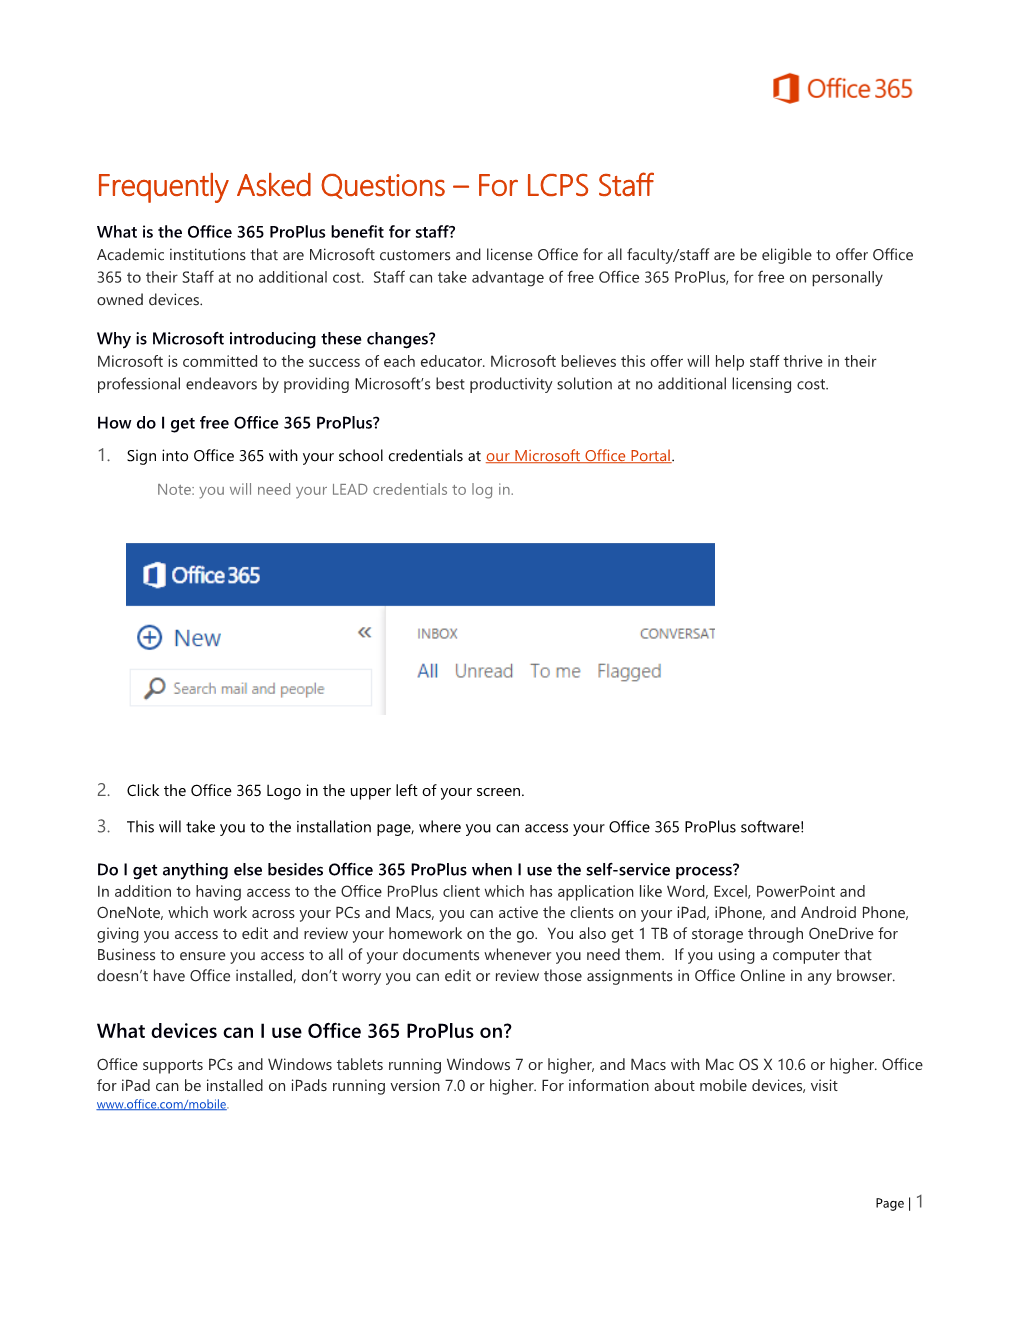 Frequently Asked Questions for LCPS Staff